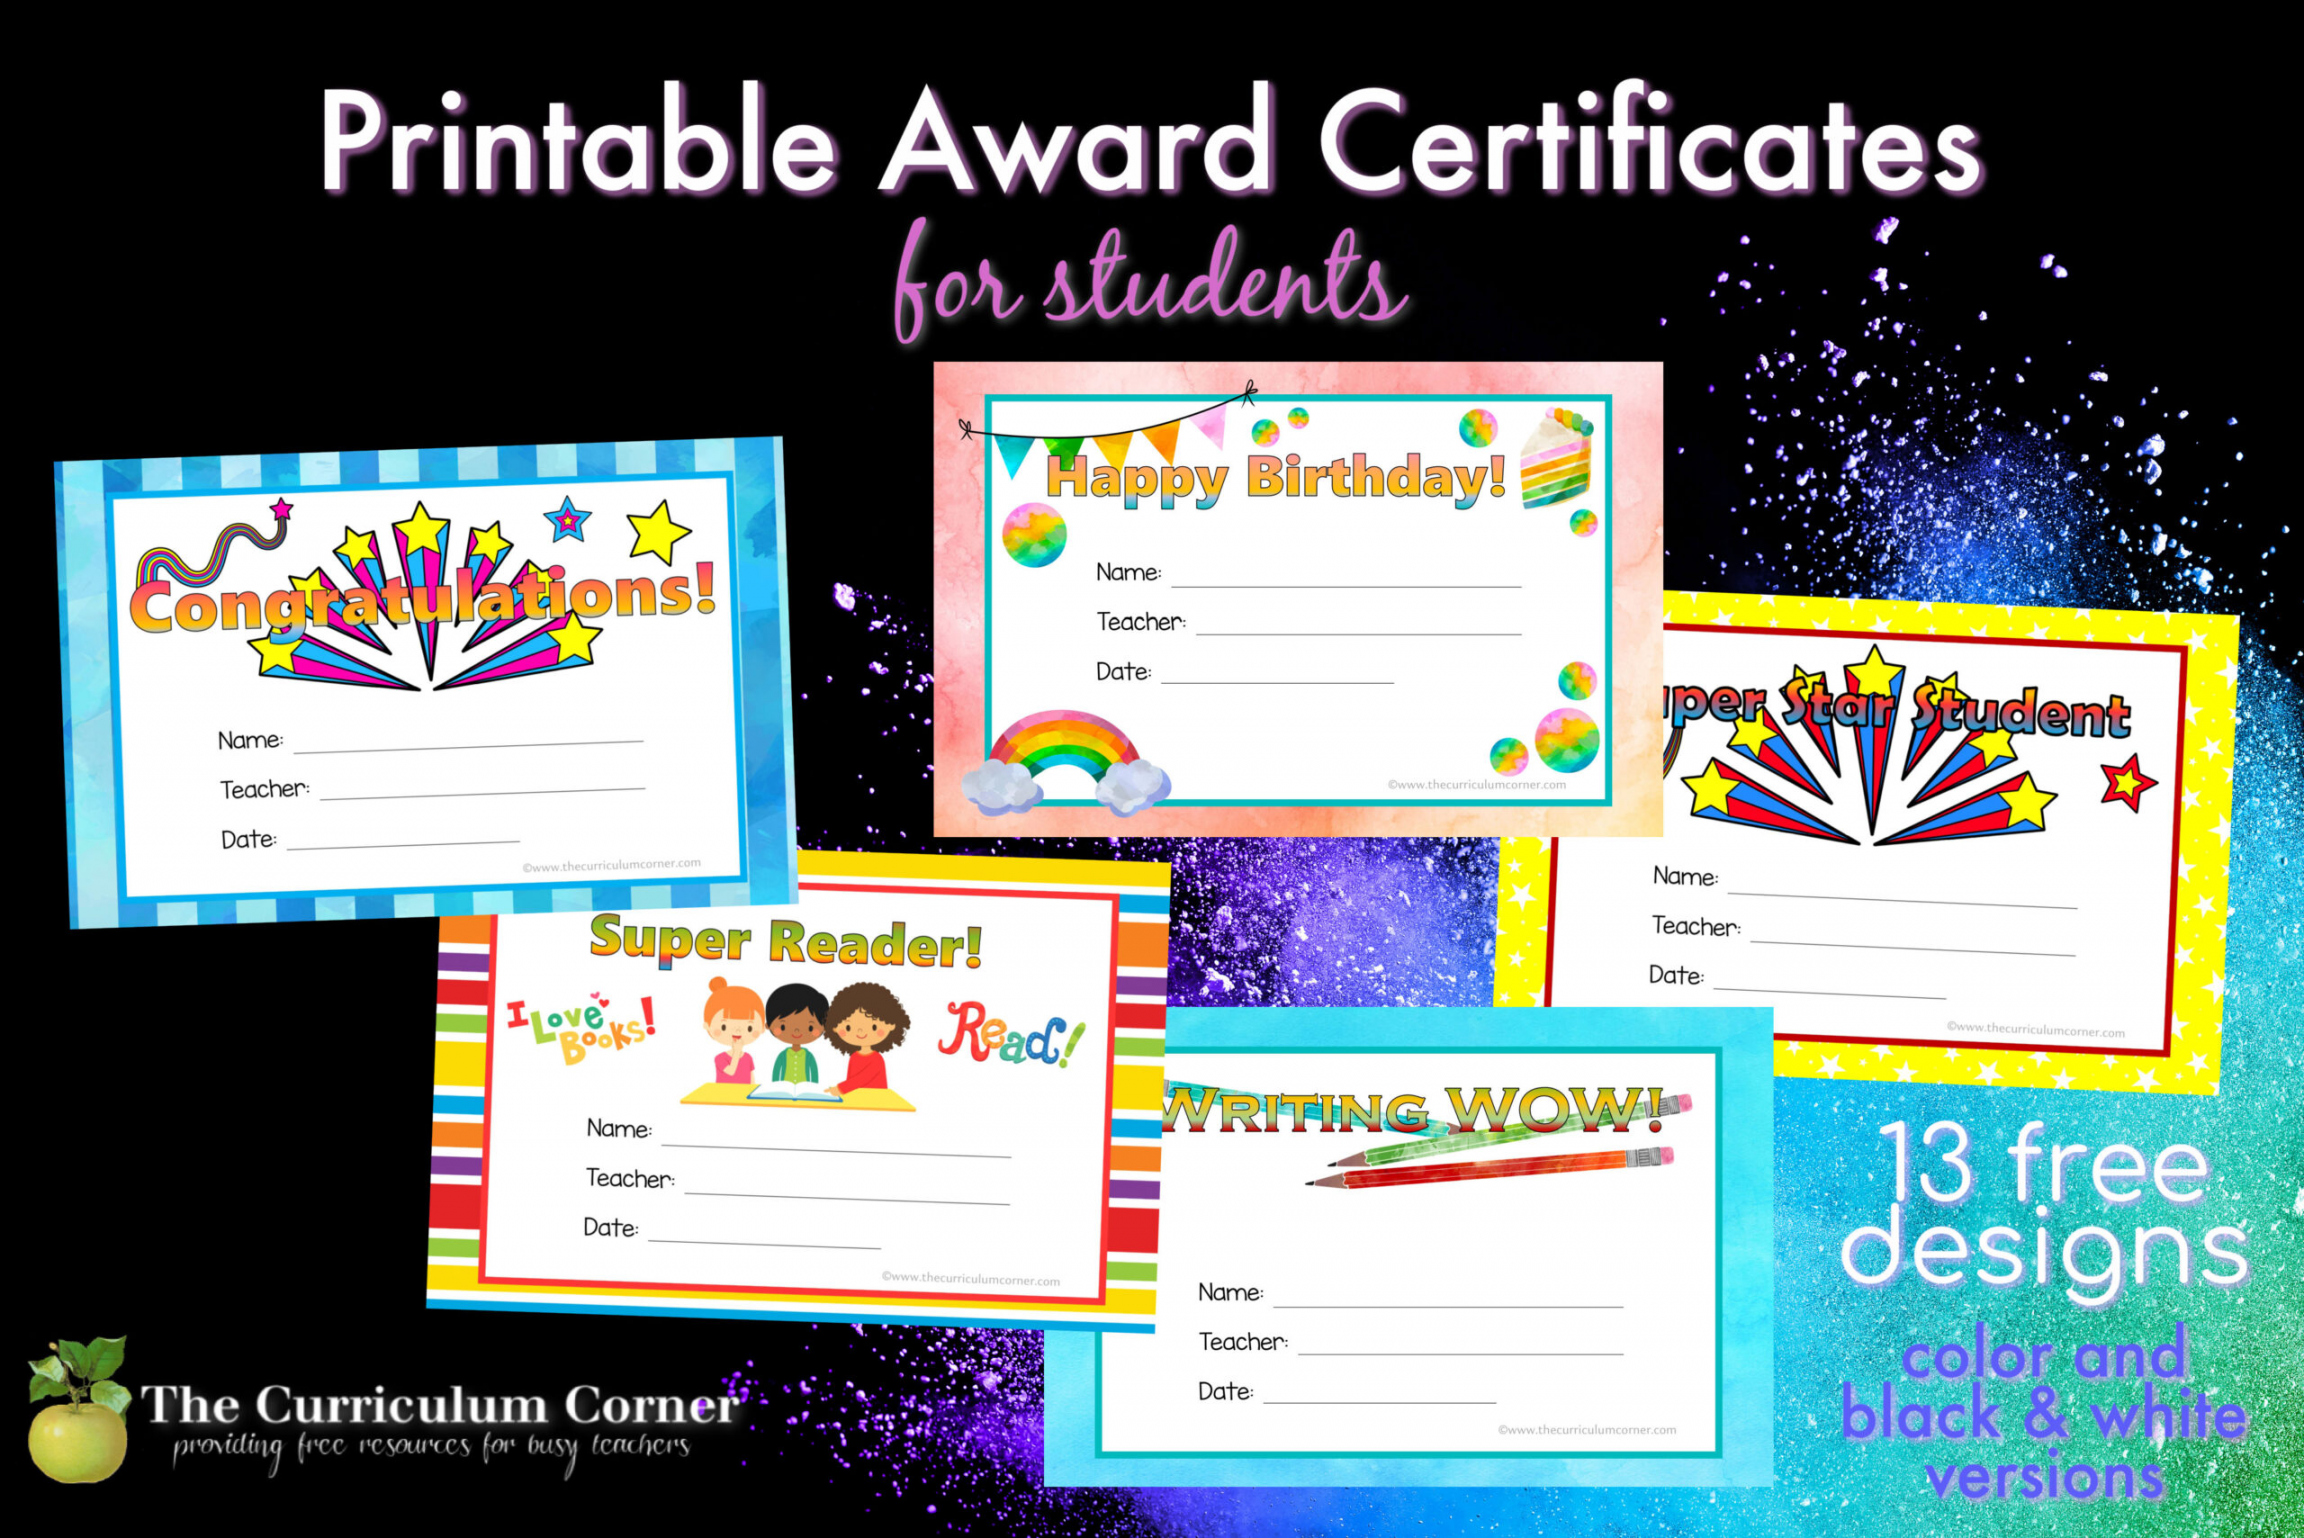 Free Printable Certificates And Awards - Printable - Printable Award Certificates - The Curriculum Corner